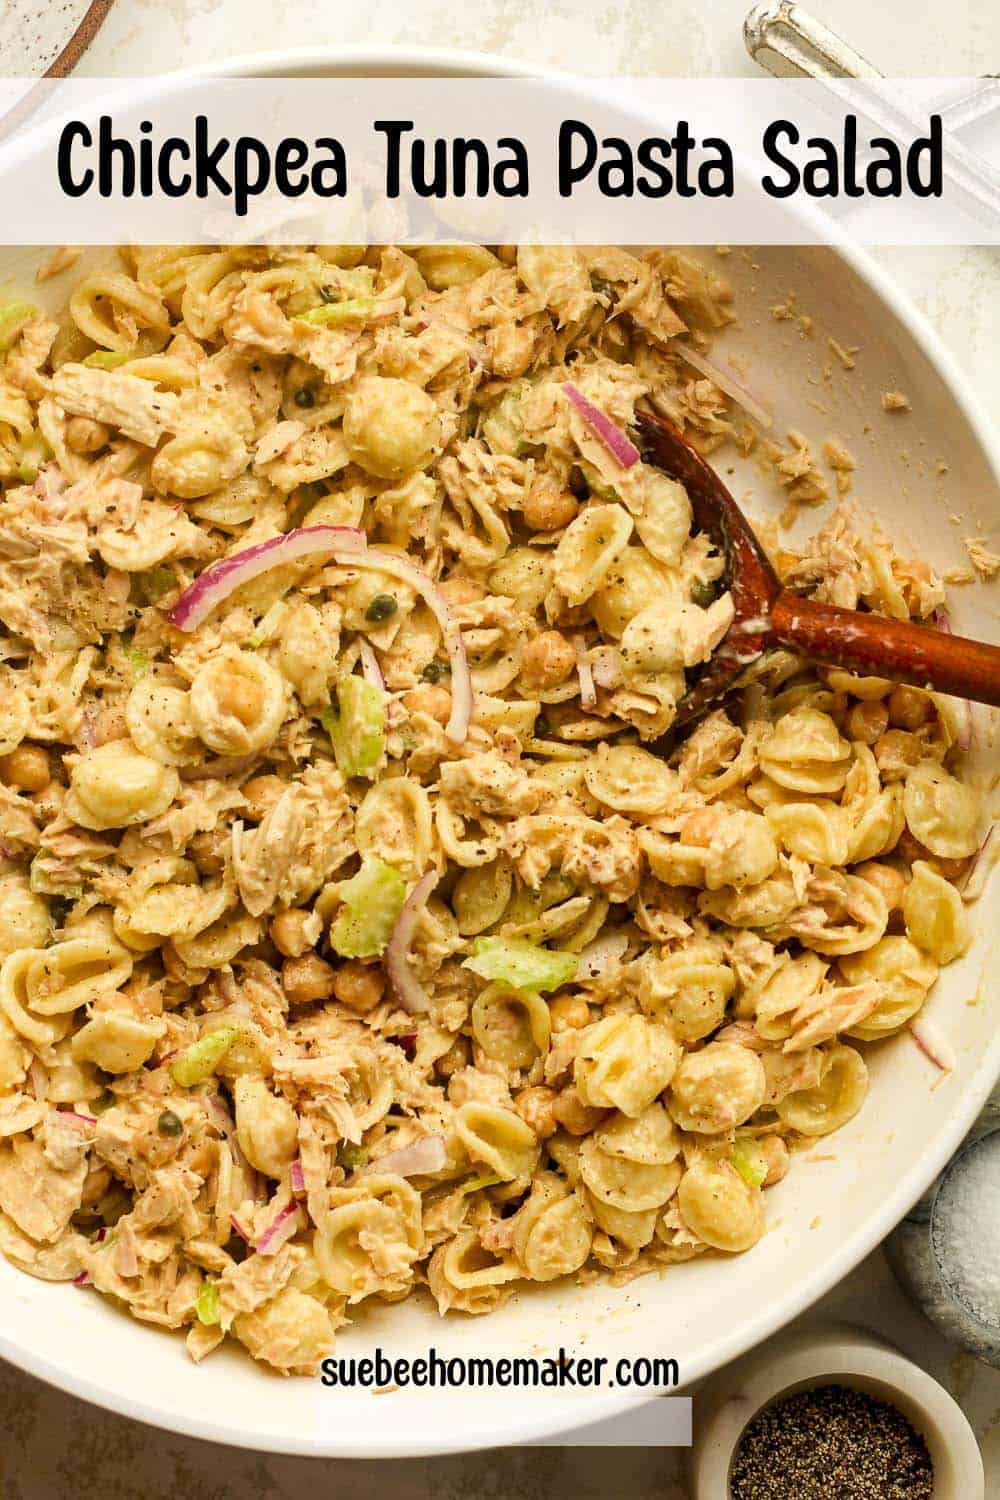 A large bowl of chickpea tuna pasta salad with a wooden spoon.